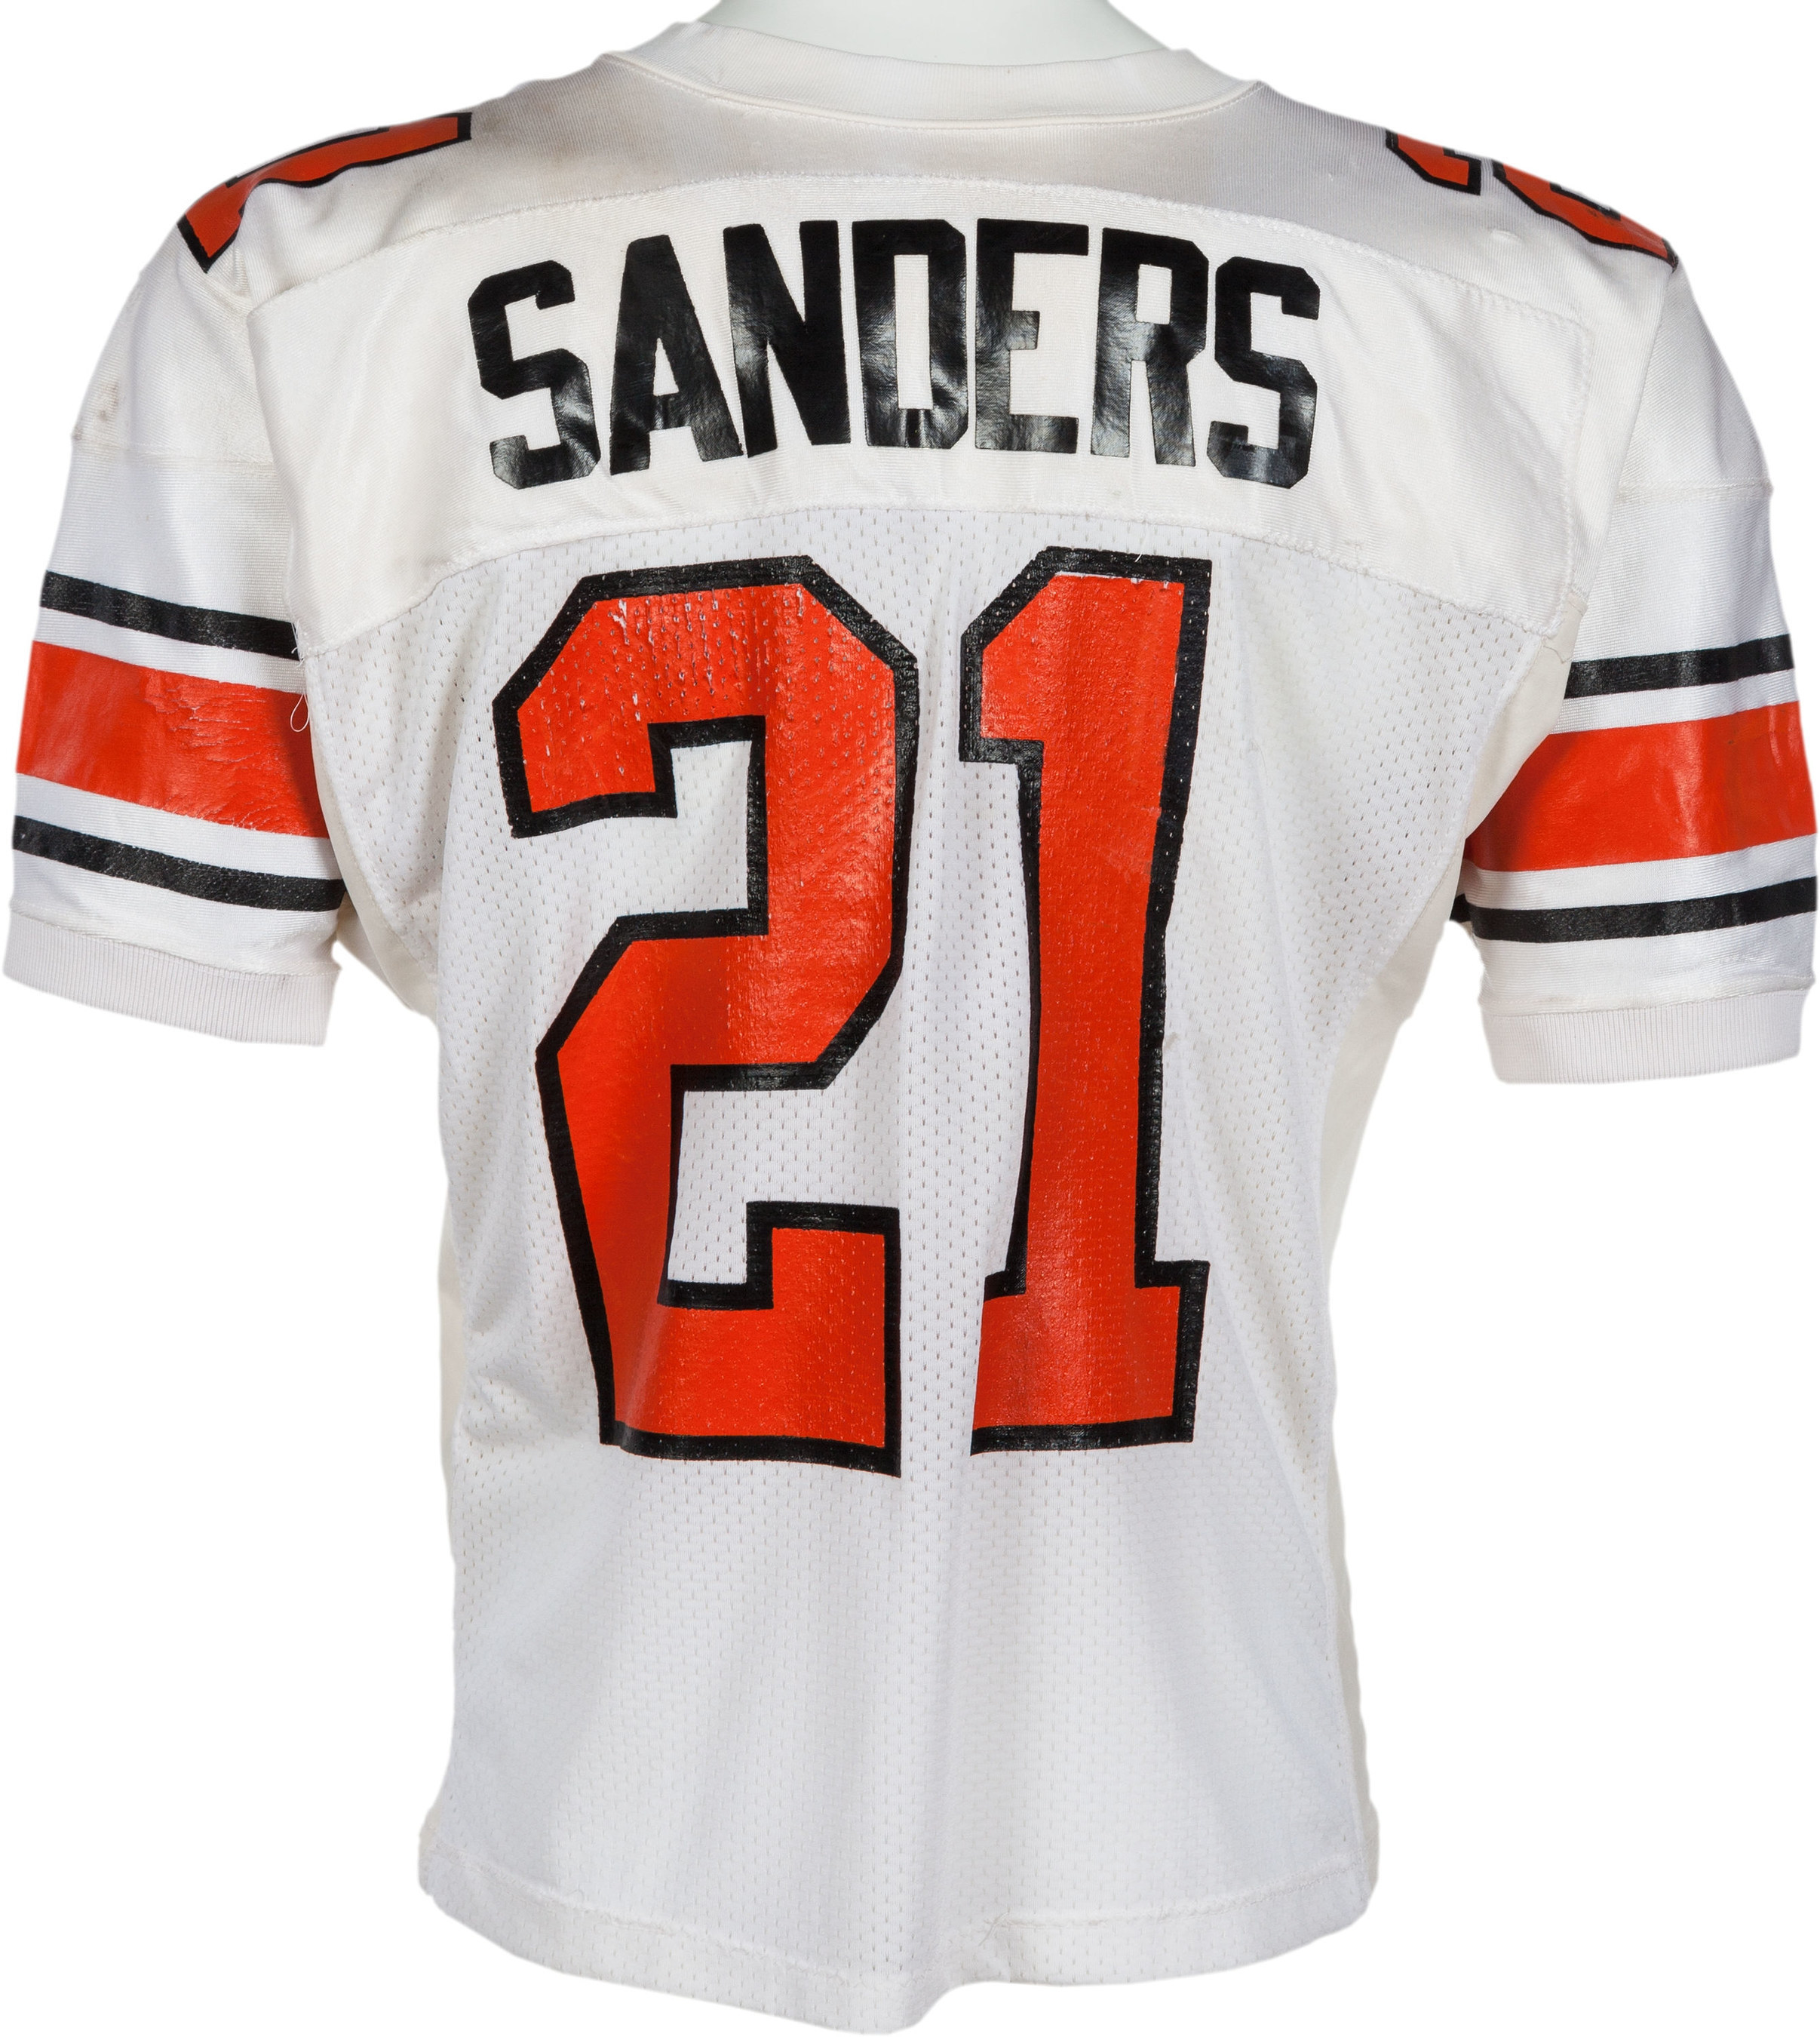 how much is a barry sanders jersey worth